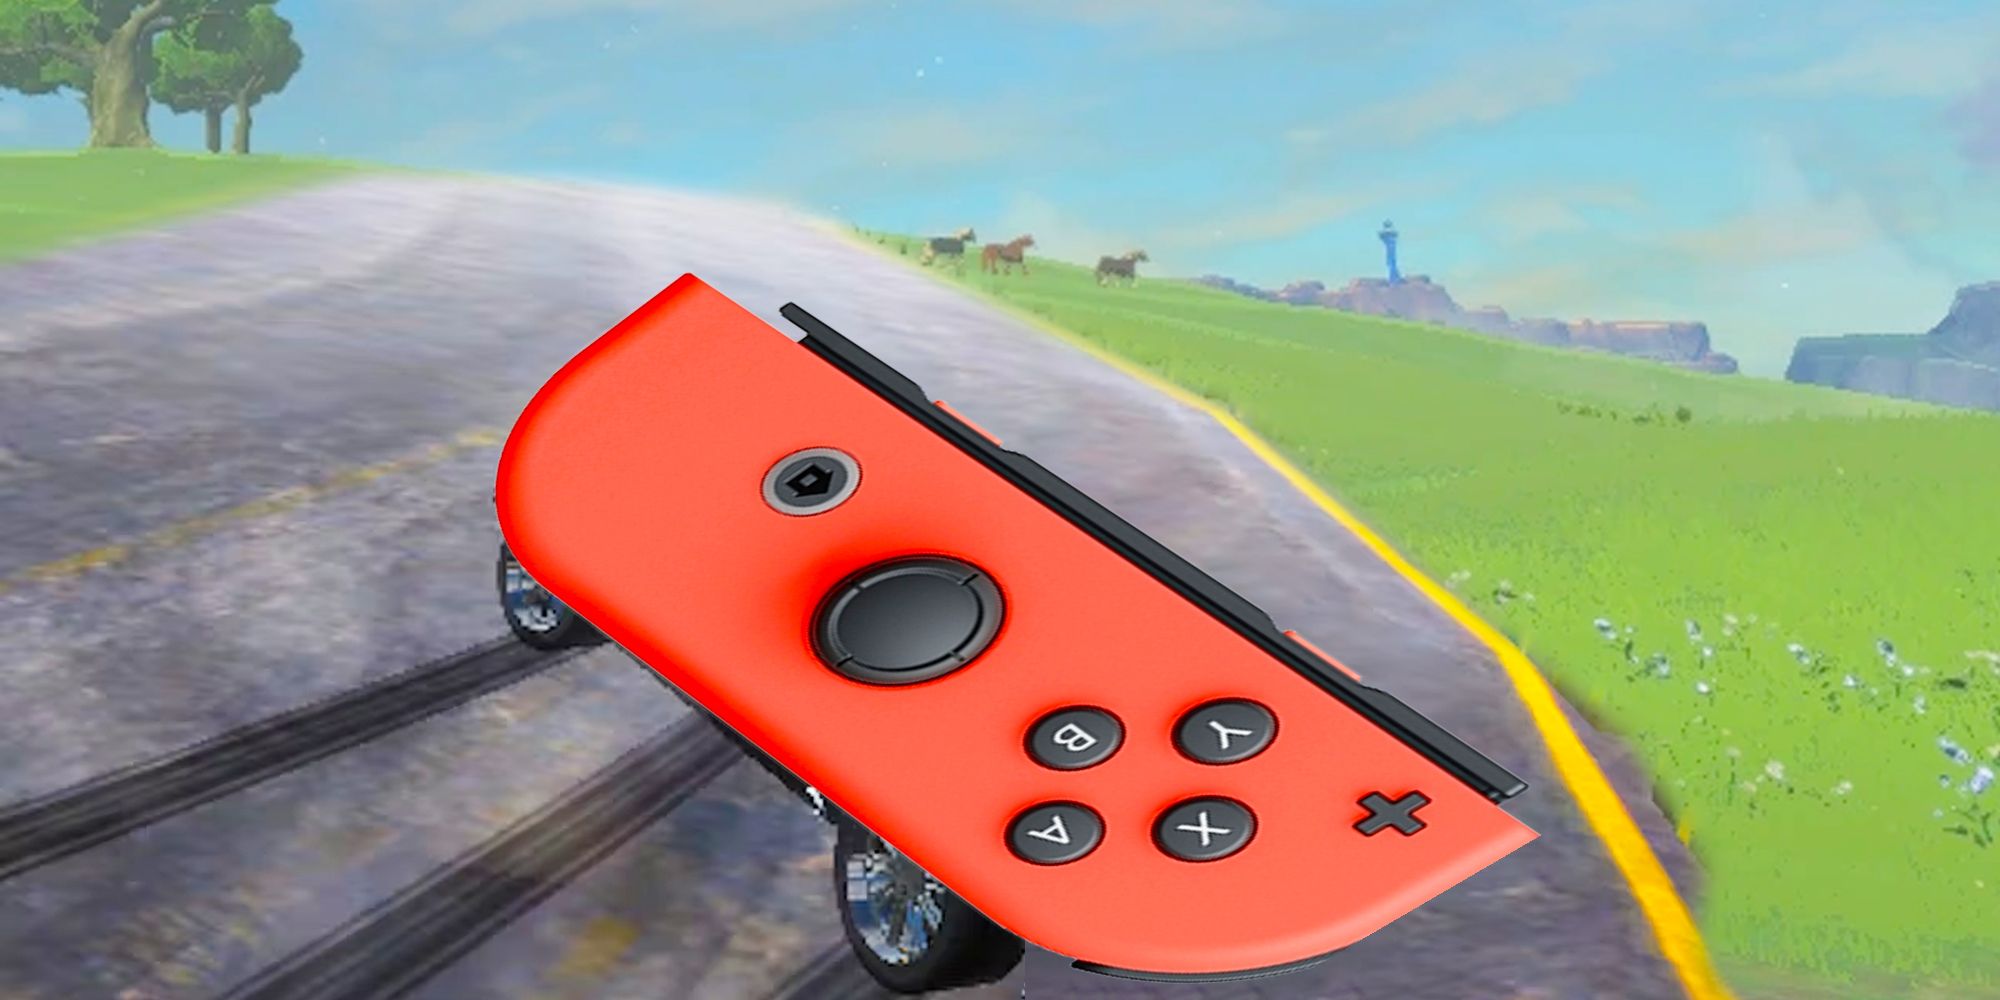 Joy-Con drifting in TOTK image showing a joy-con drifting off a road in Hyrule